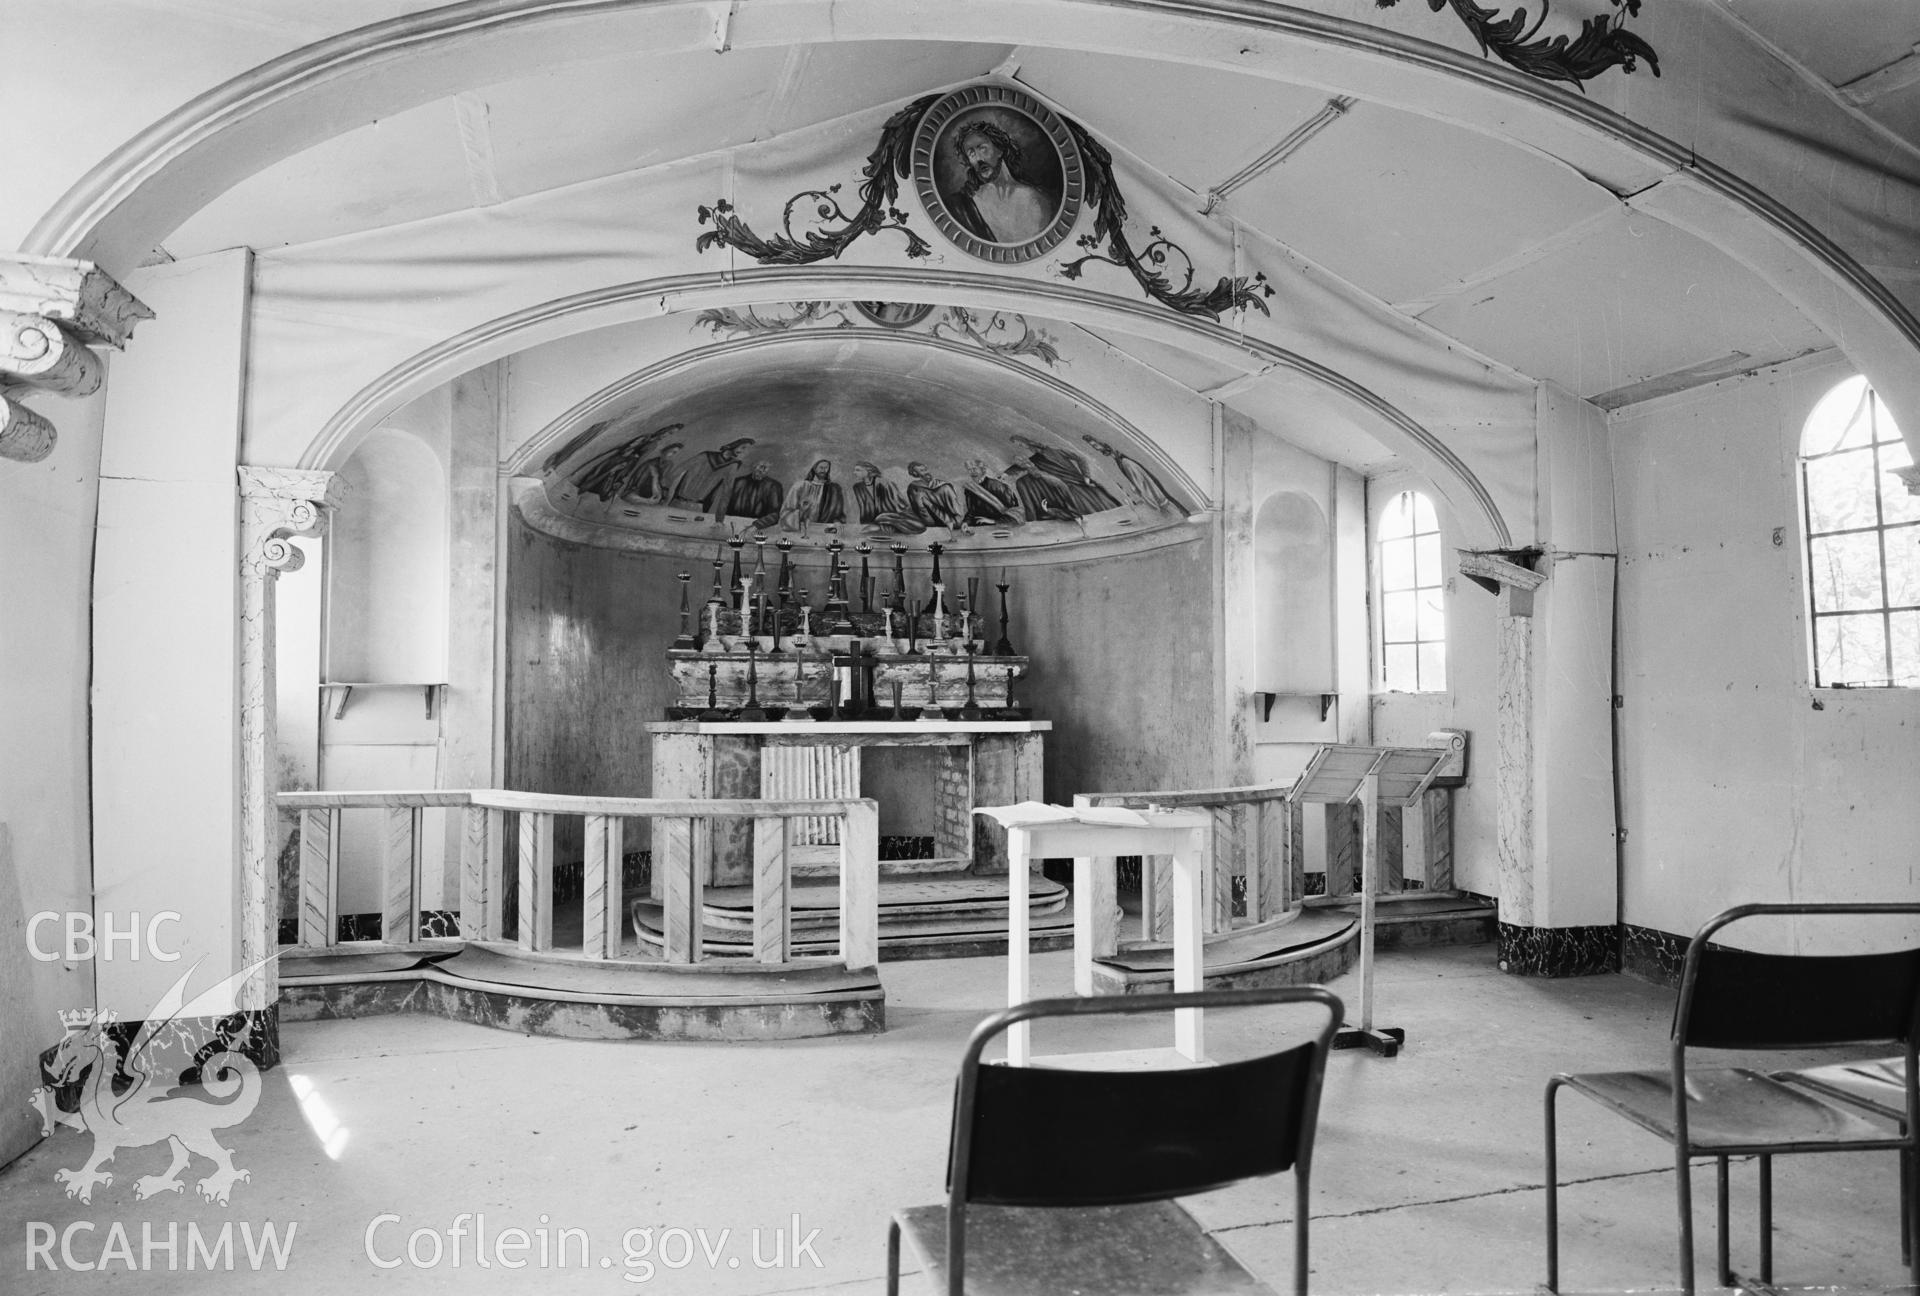 Interior of Capel Eidalwyr Italian Catholic chapel, at Henllan Bridge Prisoner of War camp. The chapel was adapted from a Nissen hut by Mario Ferlito when 1,200 Italians captured in Libya and Tunisia arrived there in 1943.